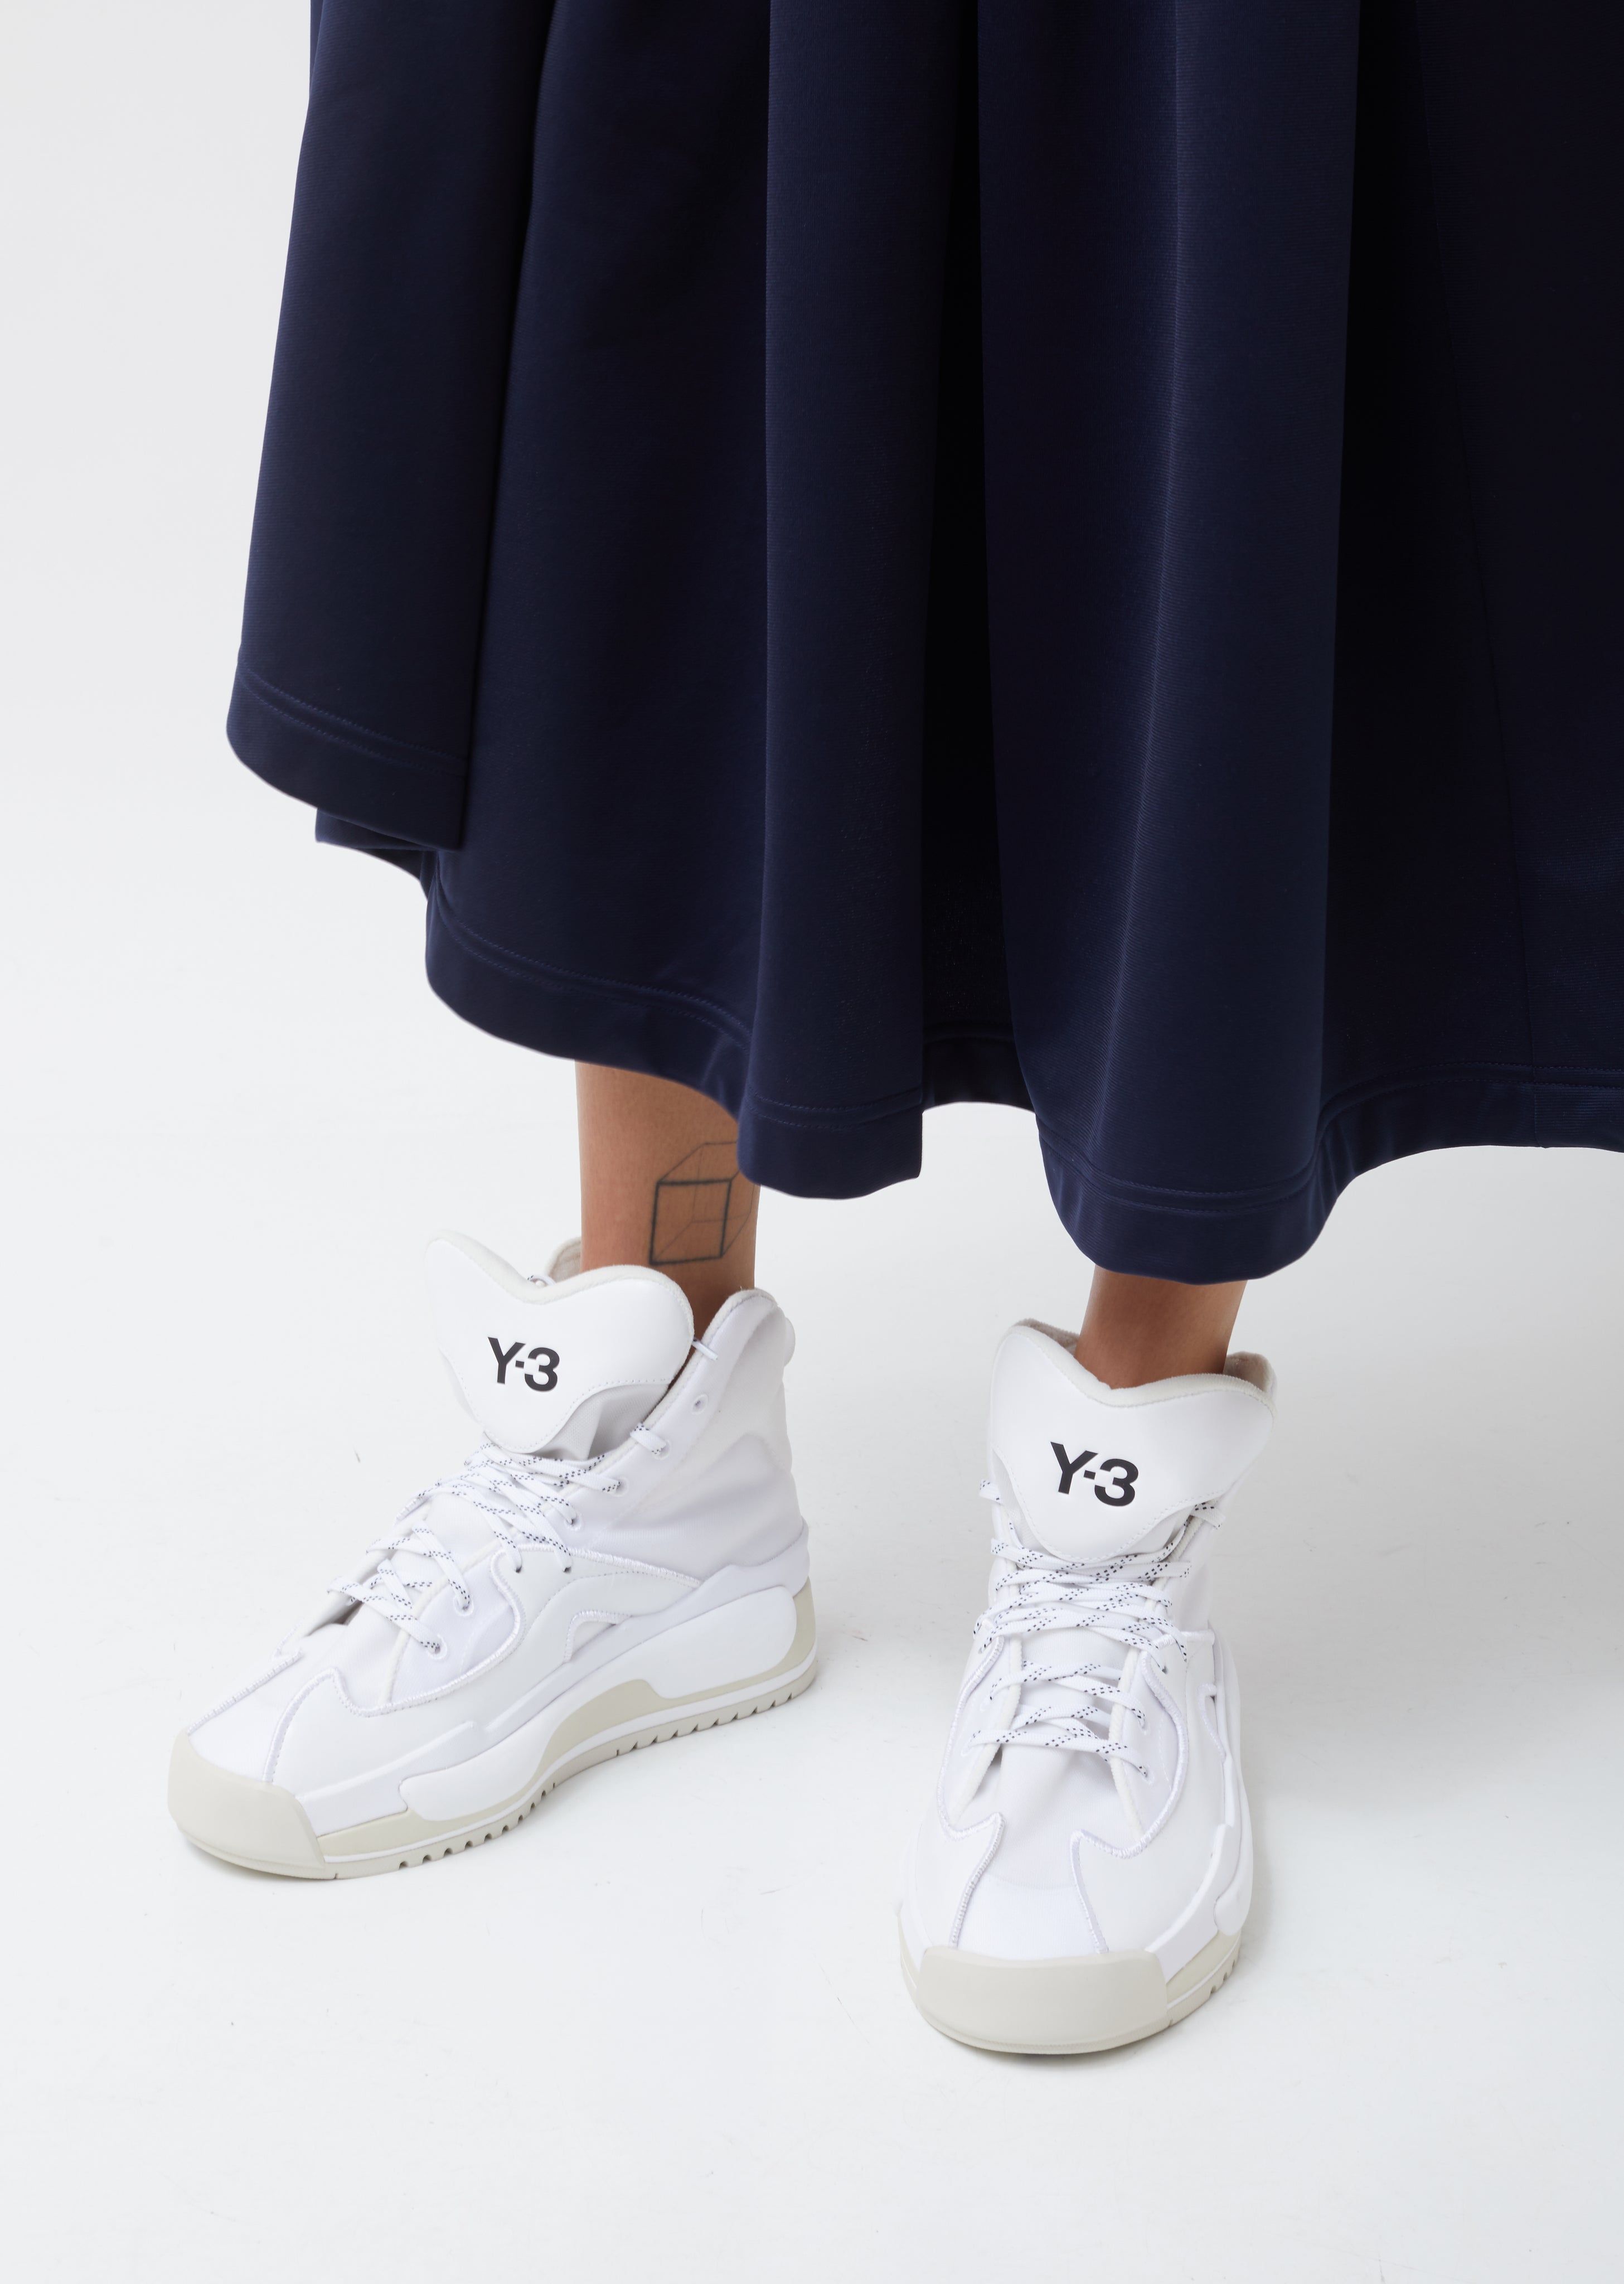 y3 shoes womens